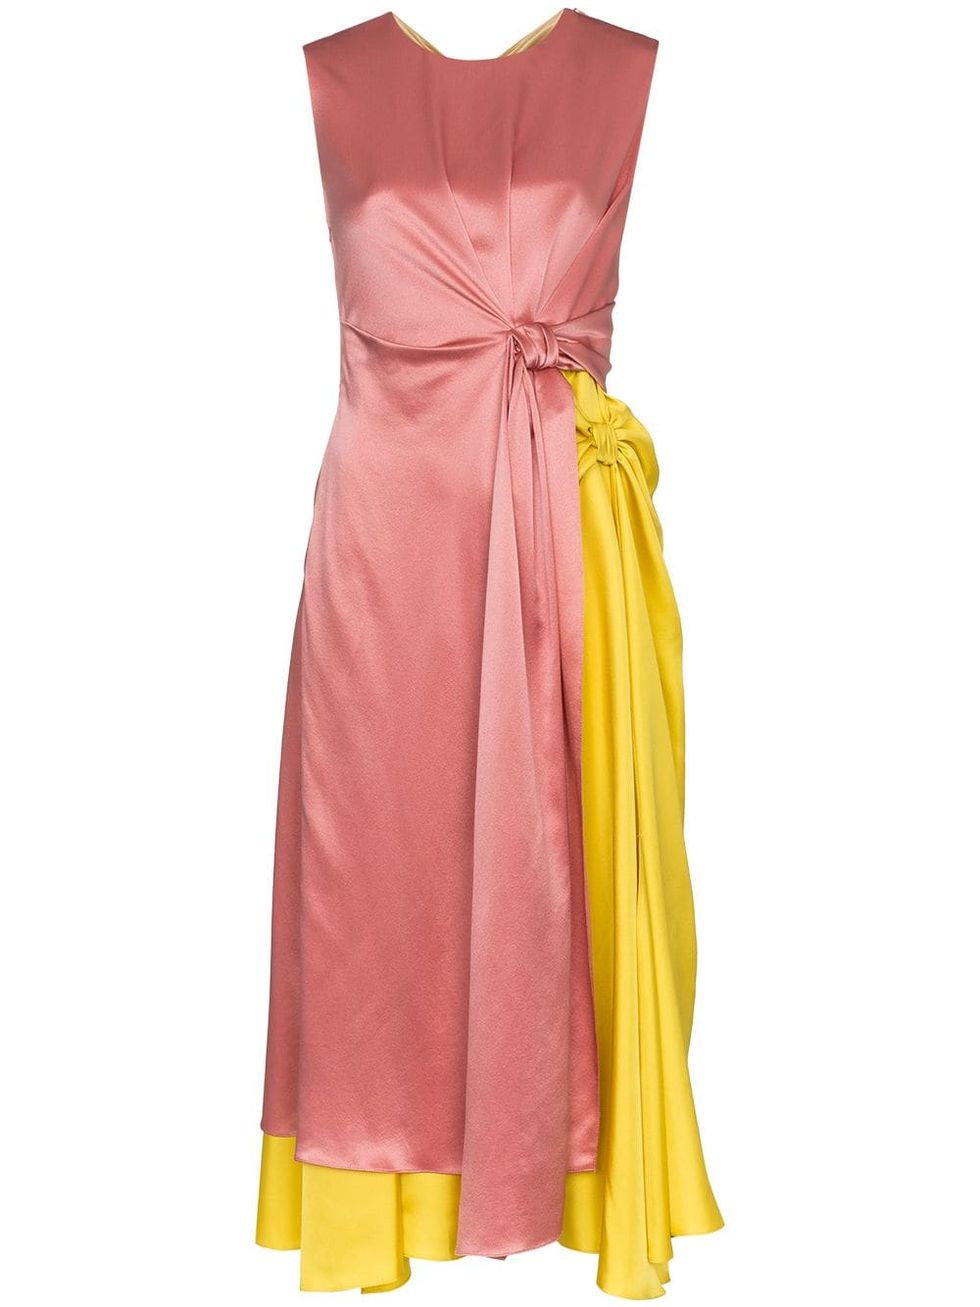 Clothing, Dress, Day dress, Yellow, Pink, Cocktail dress, Gown, Formal wear, Bridal party dress, Magenta, 